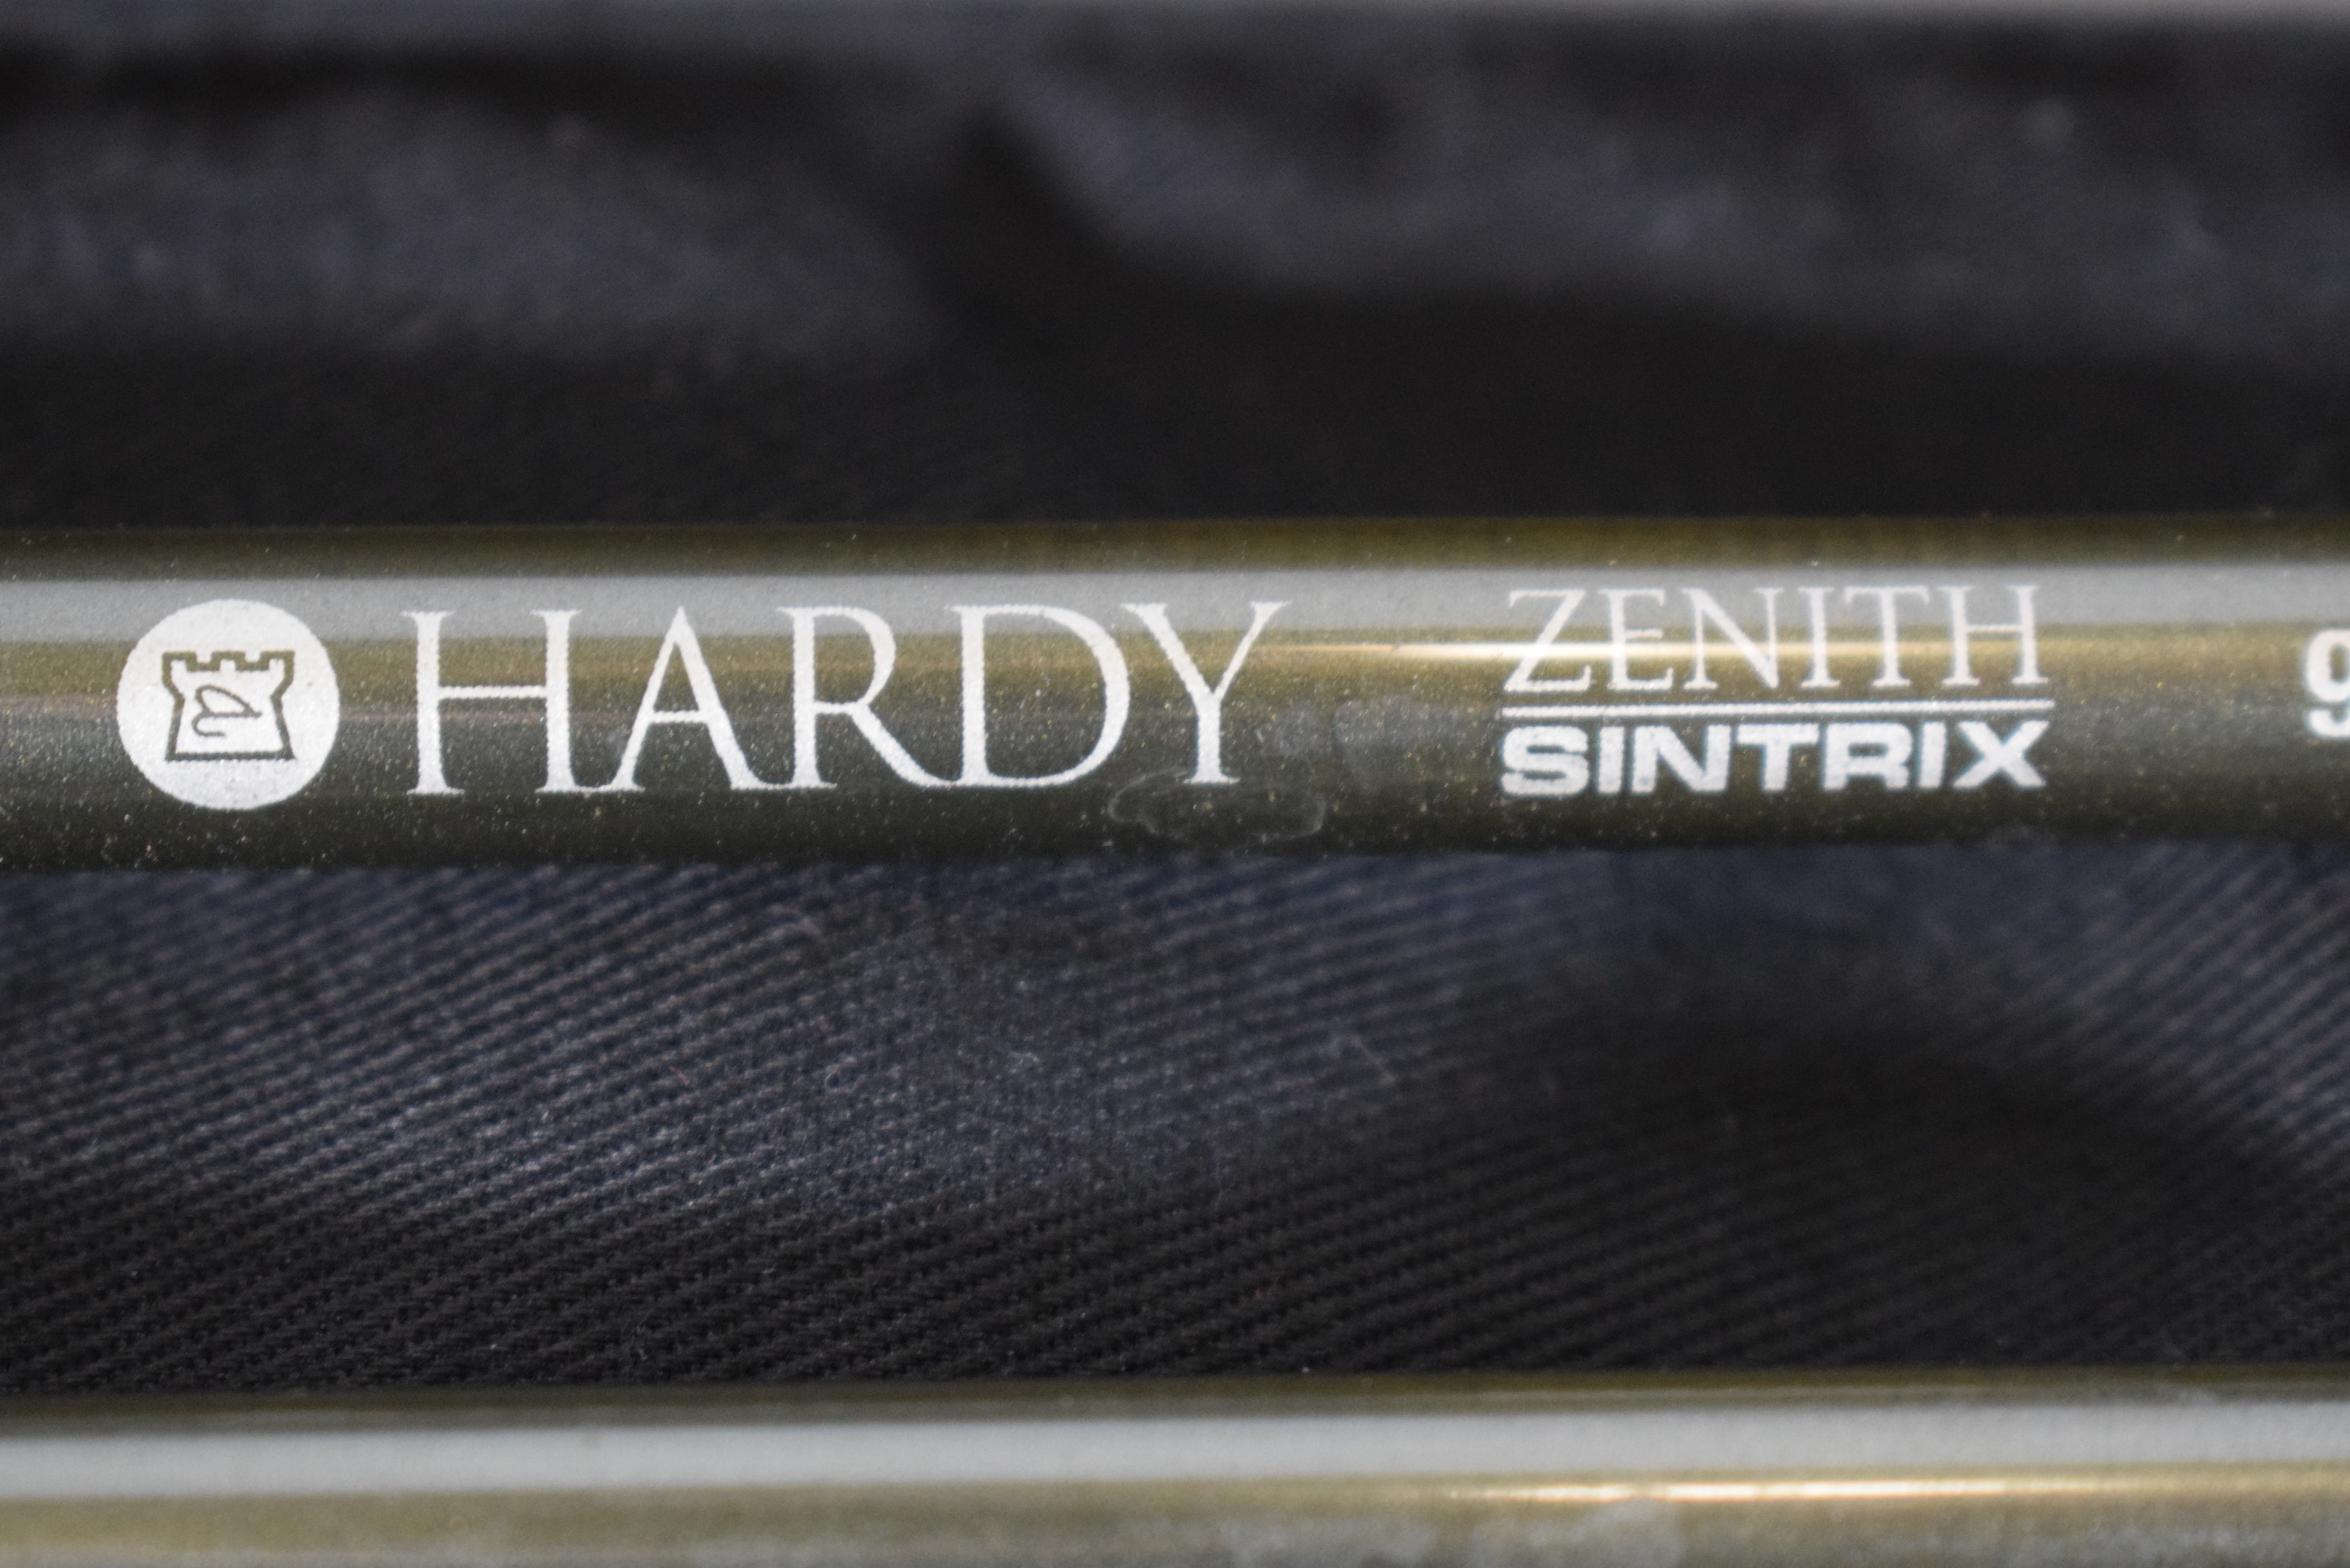 Hardy Zenith Sintrix four piece 9ft Fly Rod with hard carry case.  - Image 2 of 3